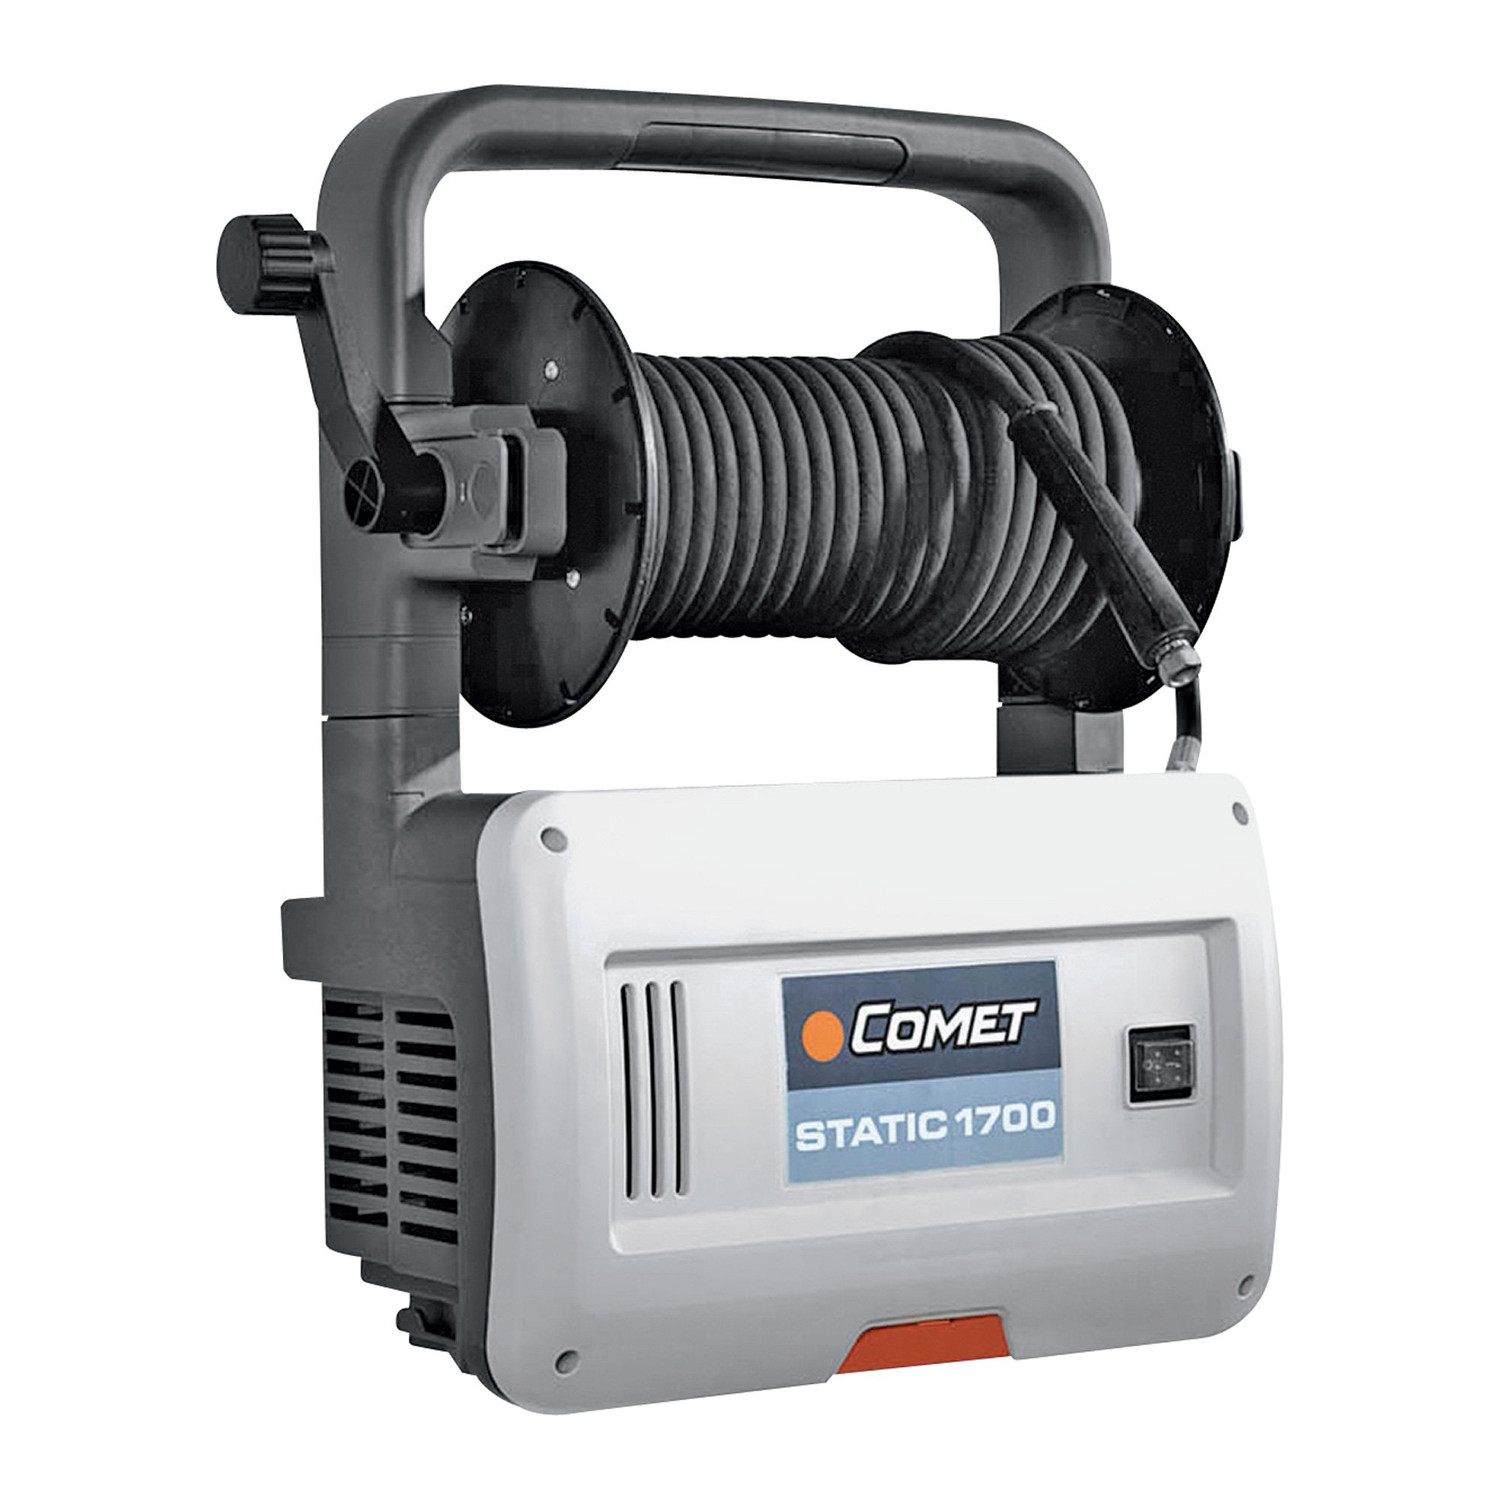 Wall Mounted Pressure Washer System - Product Overview - E4 